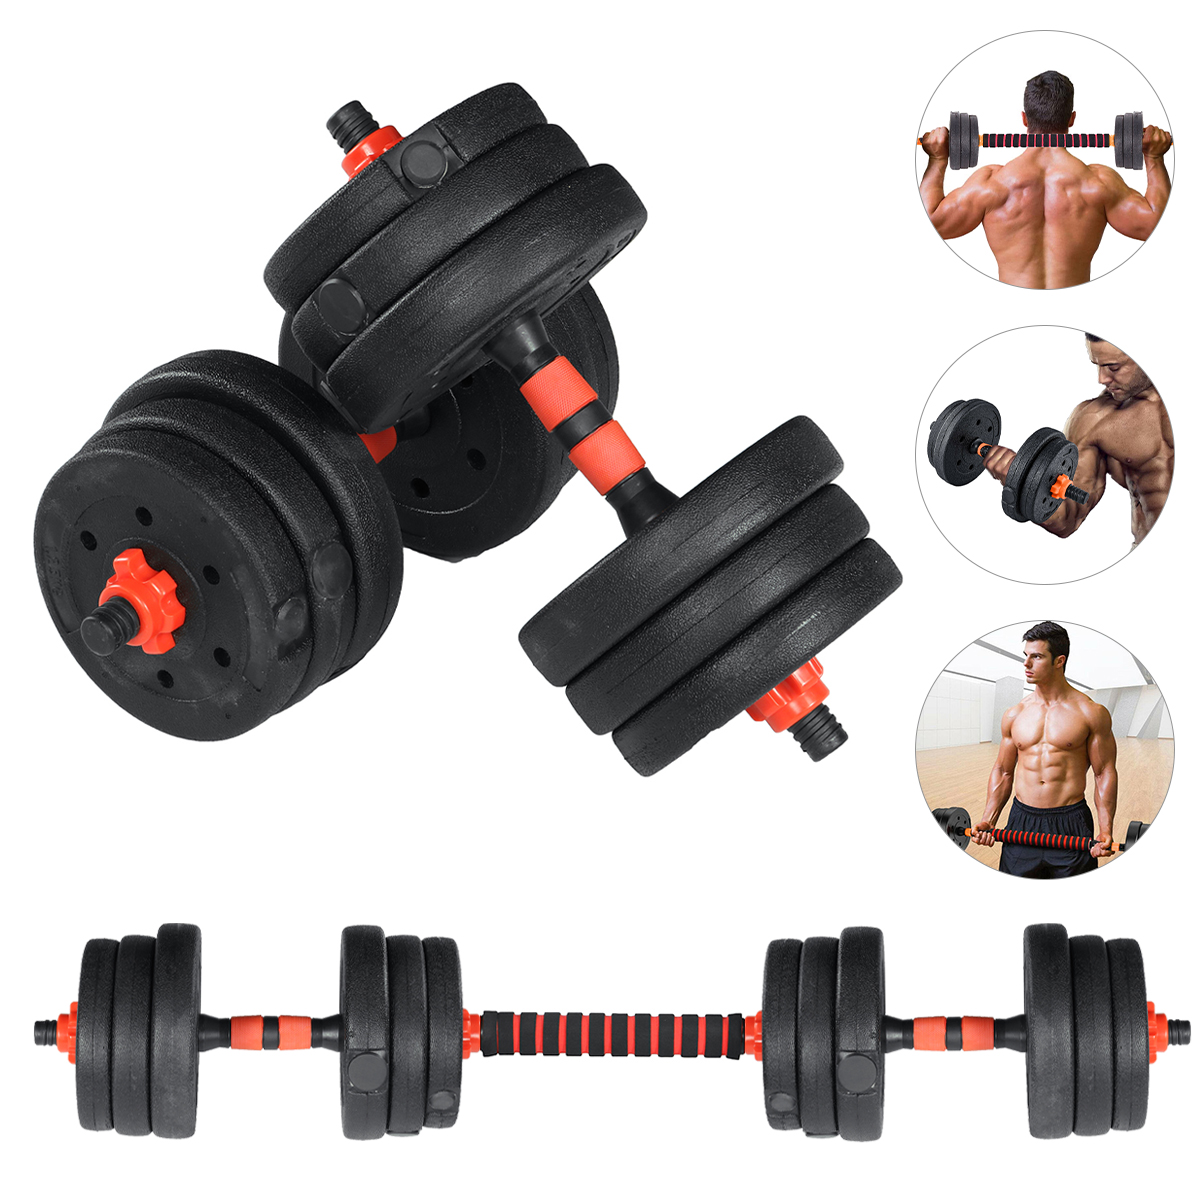 Adjustable Dumbbells,2 x 25 lbs Weights Set Fast Adjust Dumbbell Weight for Exercises Pair Dumbbells for Men and Women in Home Gym Workout Equipment,Set of 2 Packages 